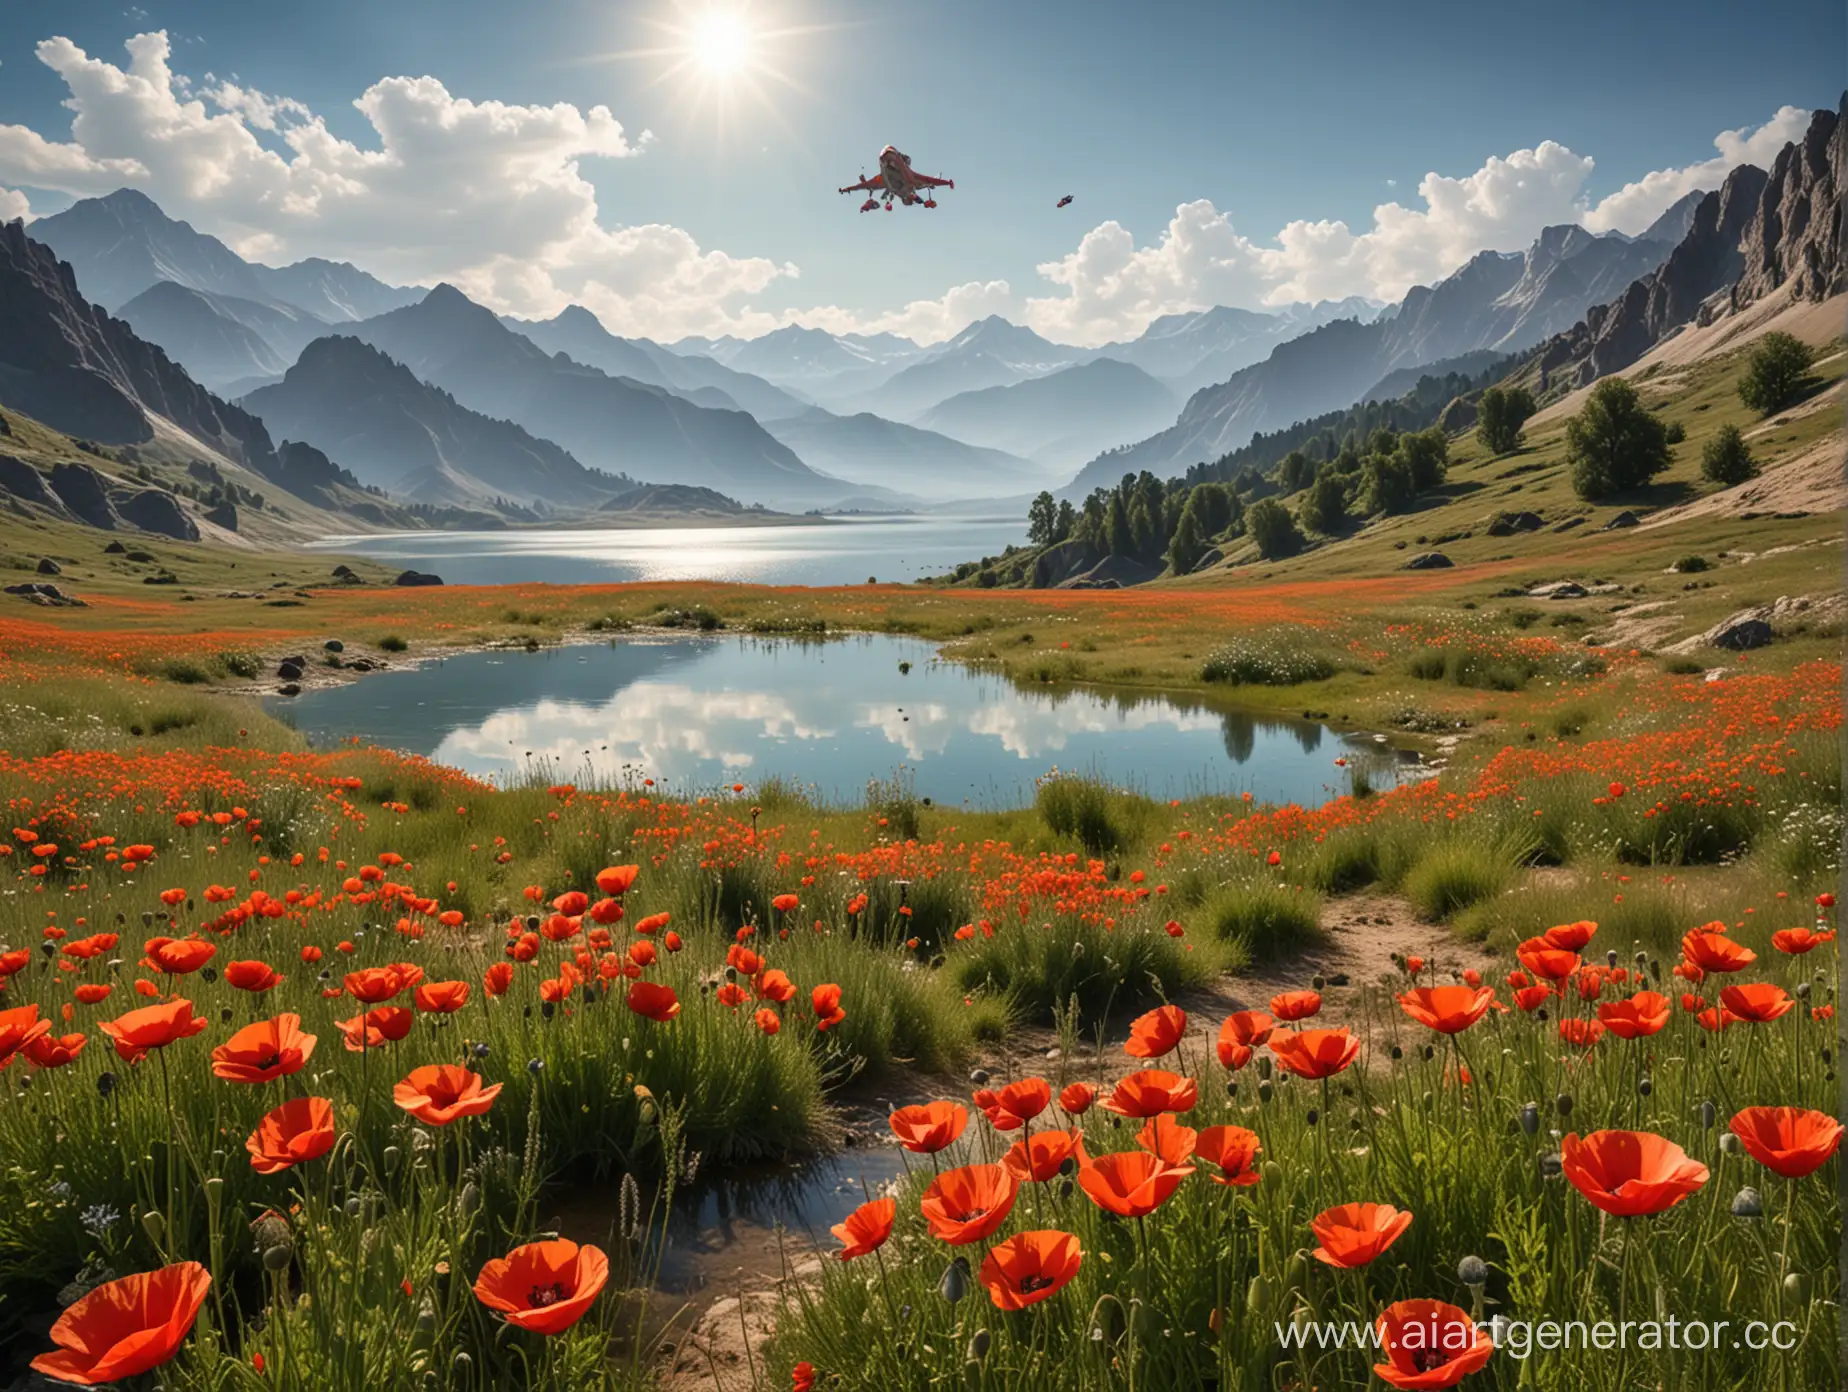 Mountain-Landscape-with-Red-Poppies-Meadow-and-Spaceship-Landing